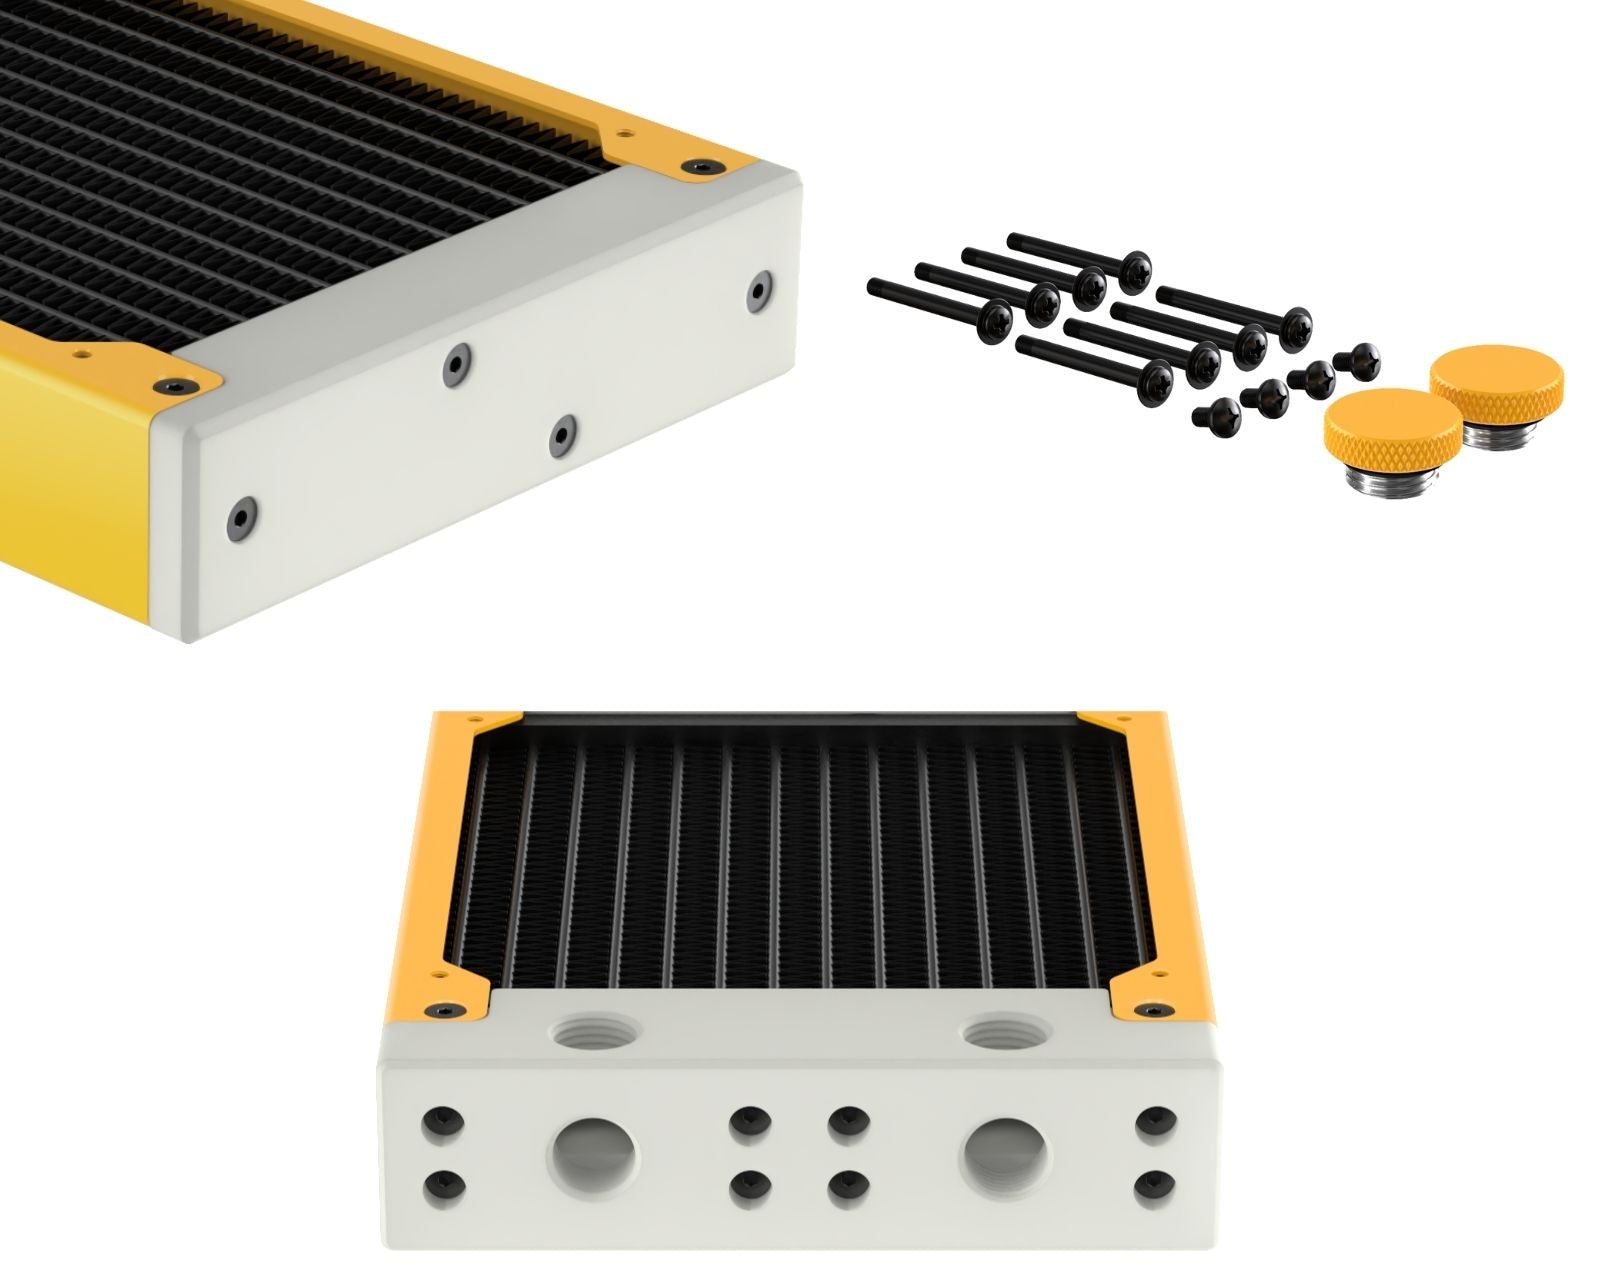 PrimoChill 240SL (30mm) EXIMO Modular Radiator, White POM, 2x120mm, Dual Fan (R-SL-W24) Available in 20+ Colors, Assembled in USA and Custom Watercooling Loop Ready - Yellow